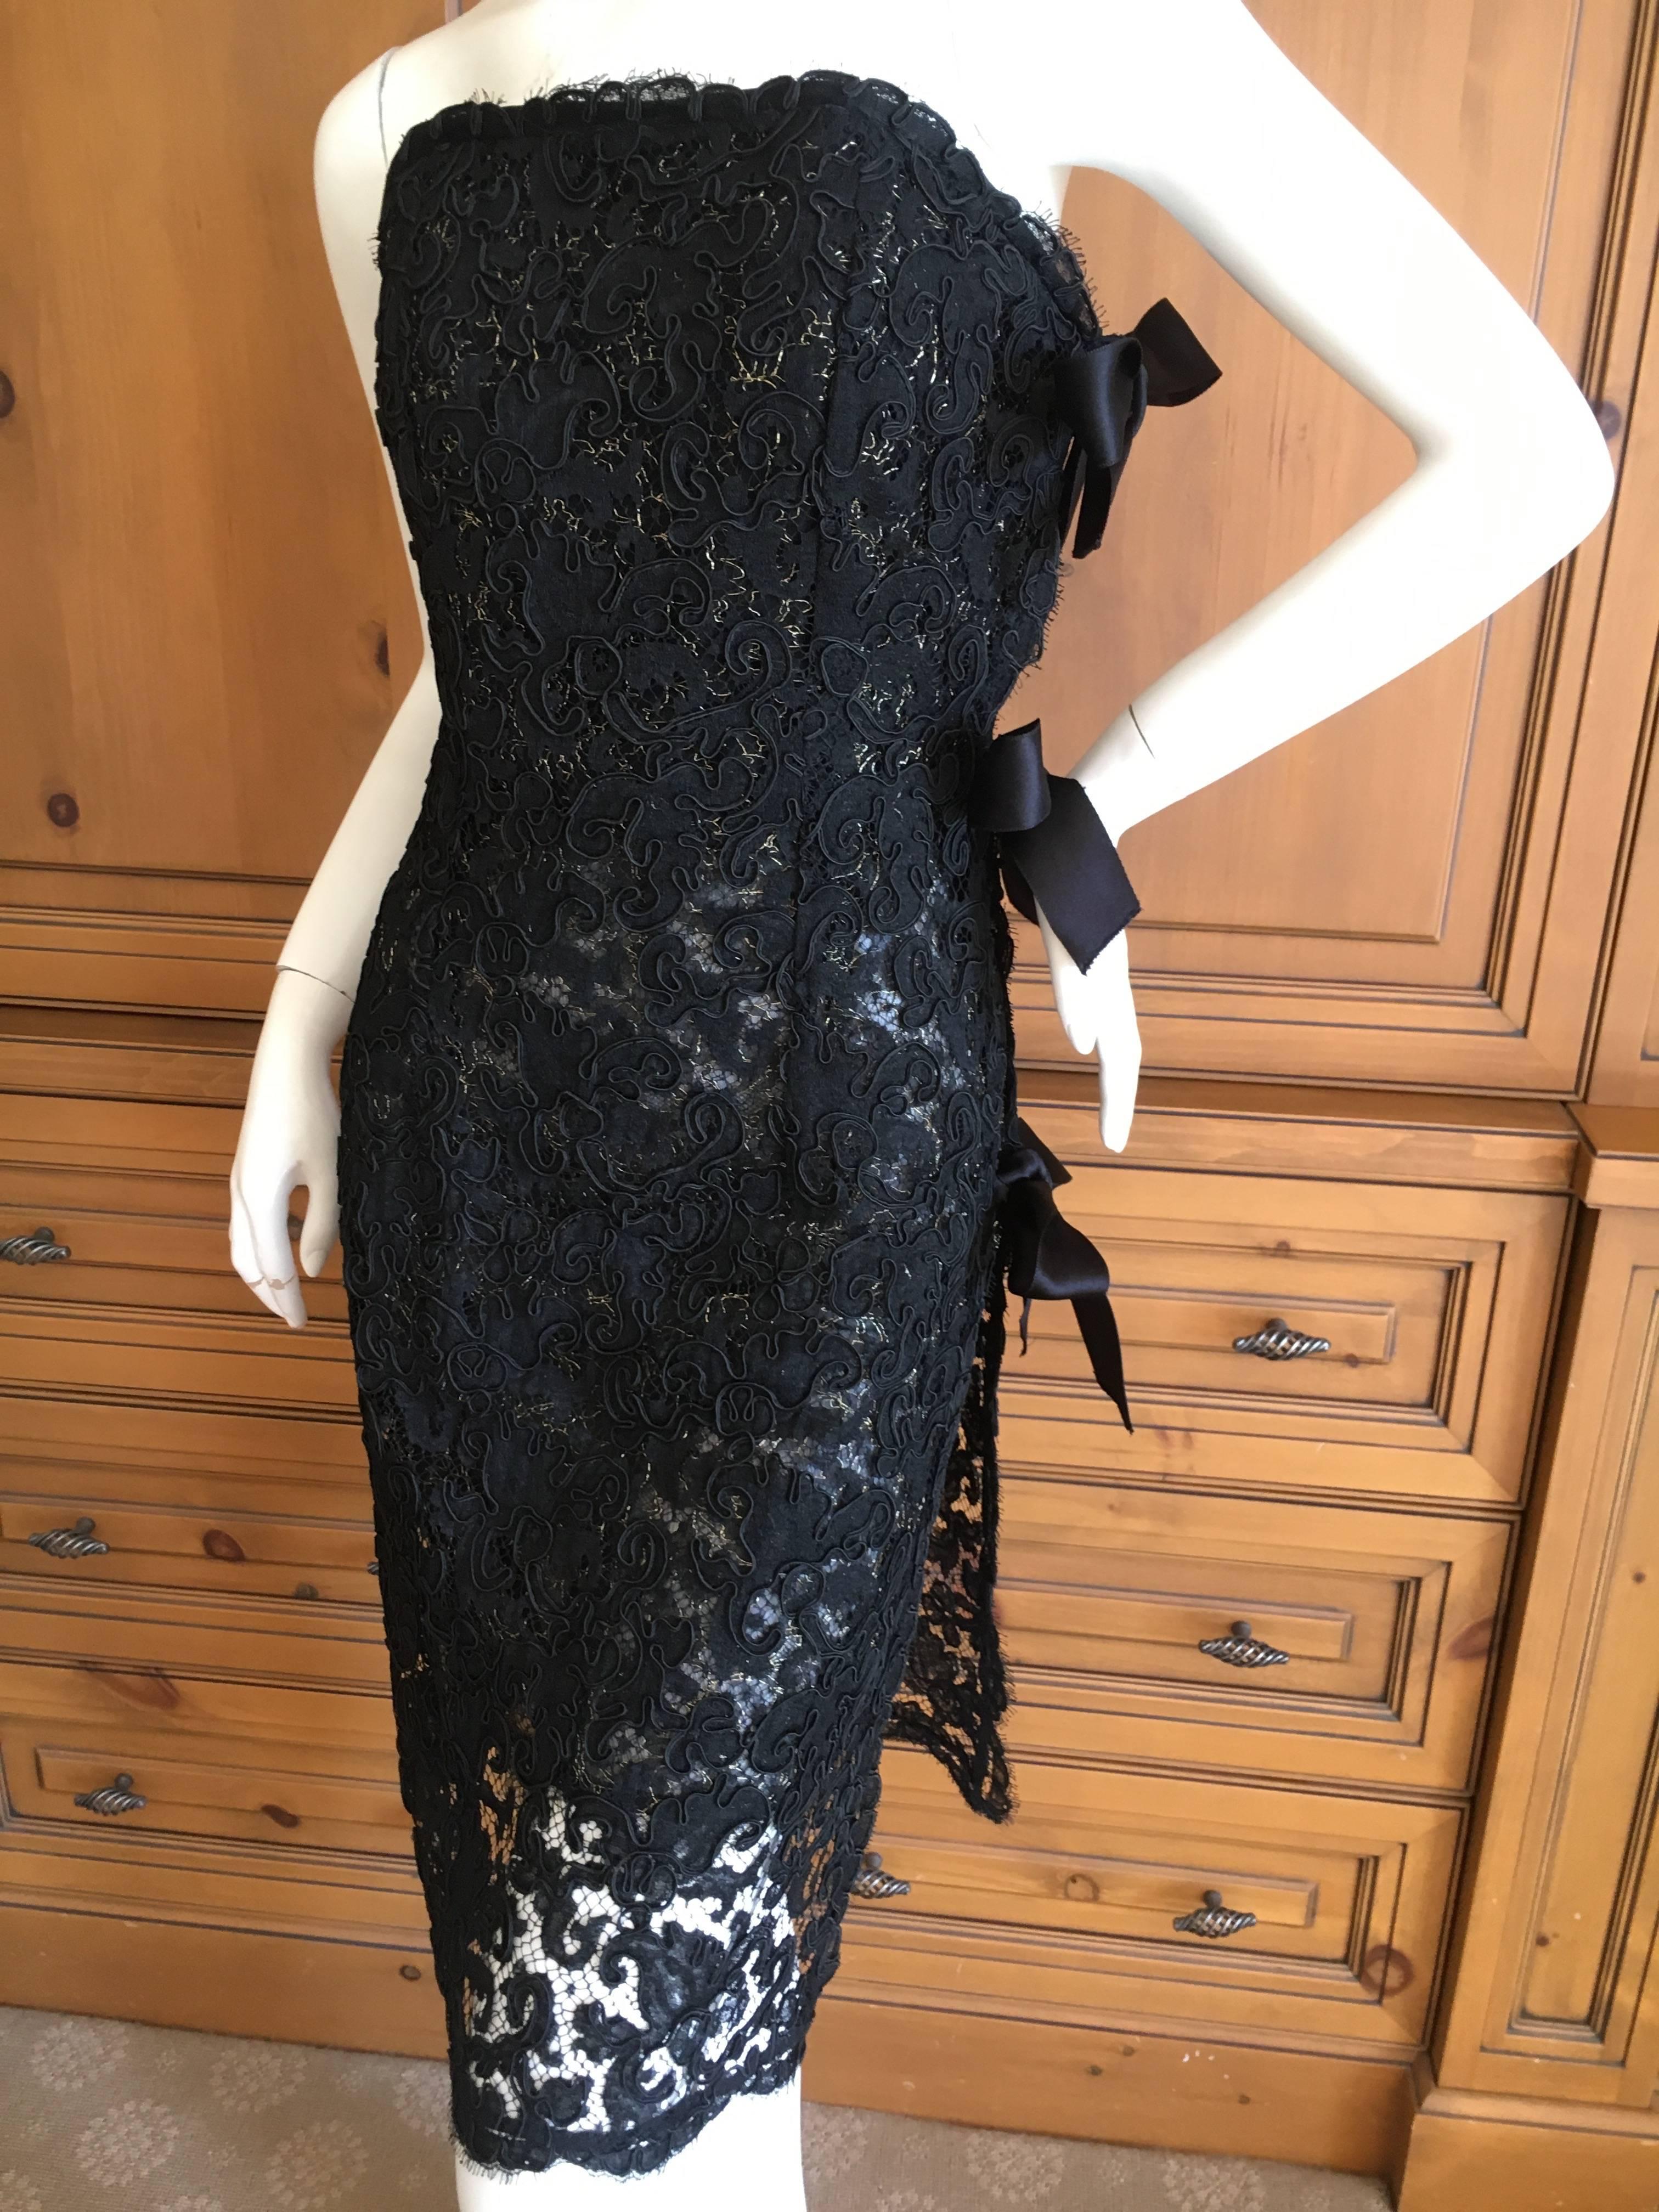 Yves Saint Laurent Rive Gauche 1970's Lace Overlay Cocktail Dress In Excellent Condition For Sale In Cloverdale, CA